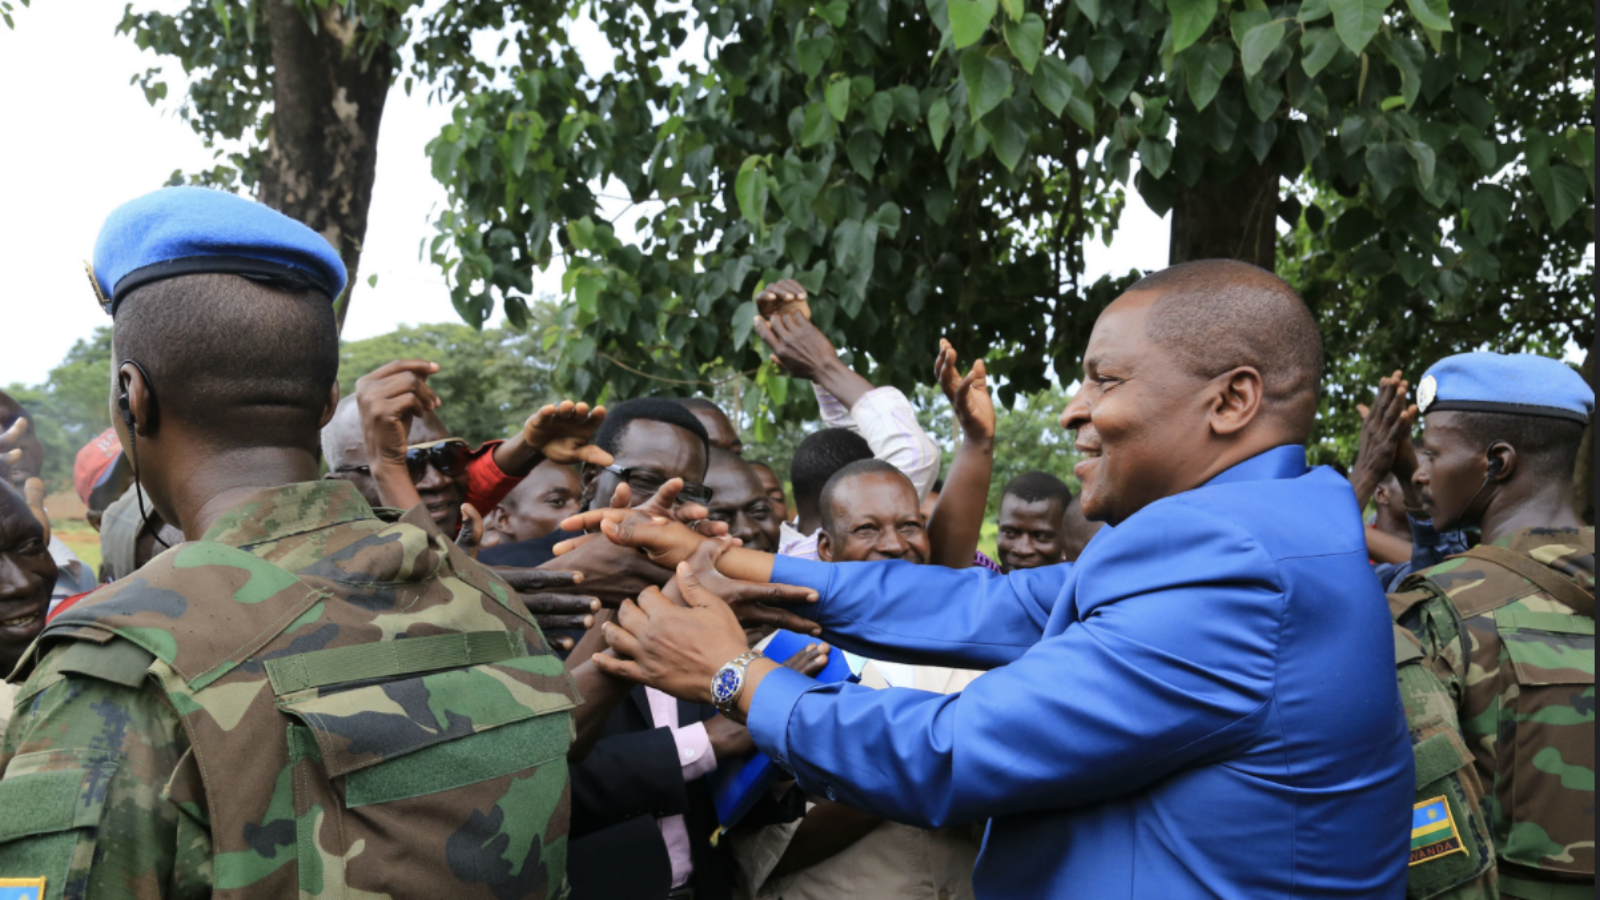 The president of the Central African Republic shakes hands with citizens alongside UN Peacekeepers.